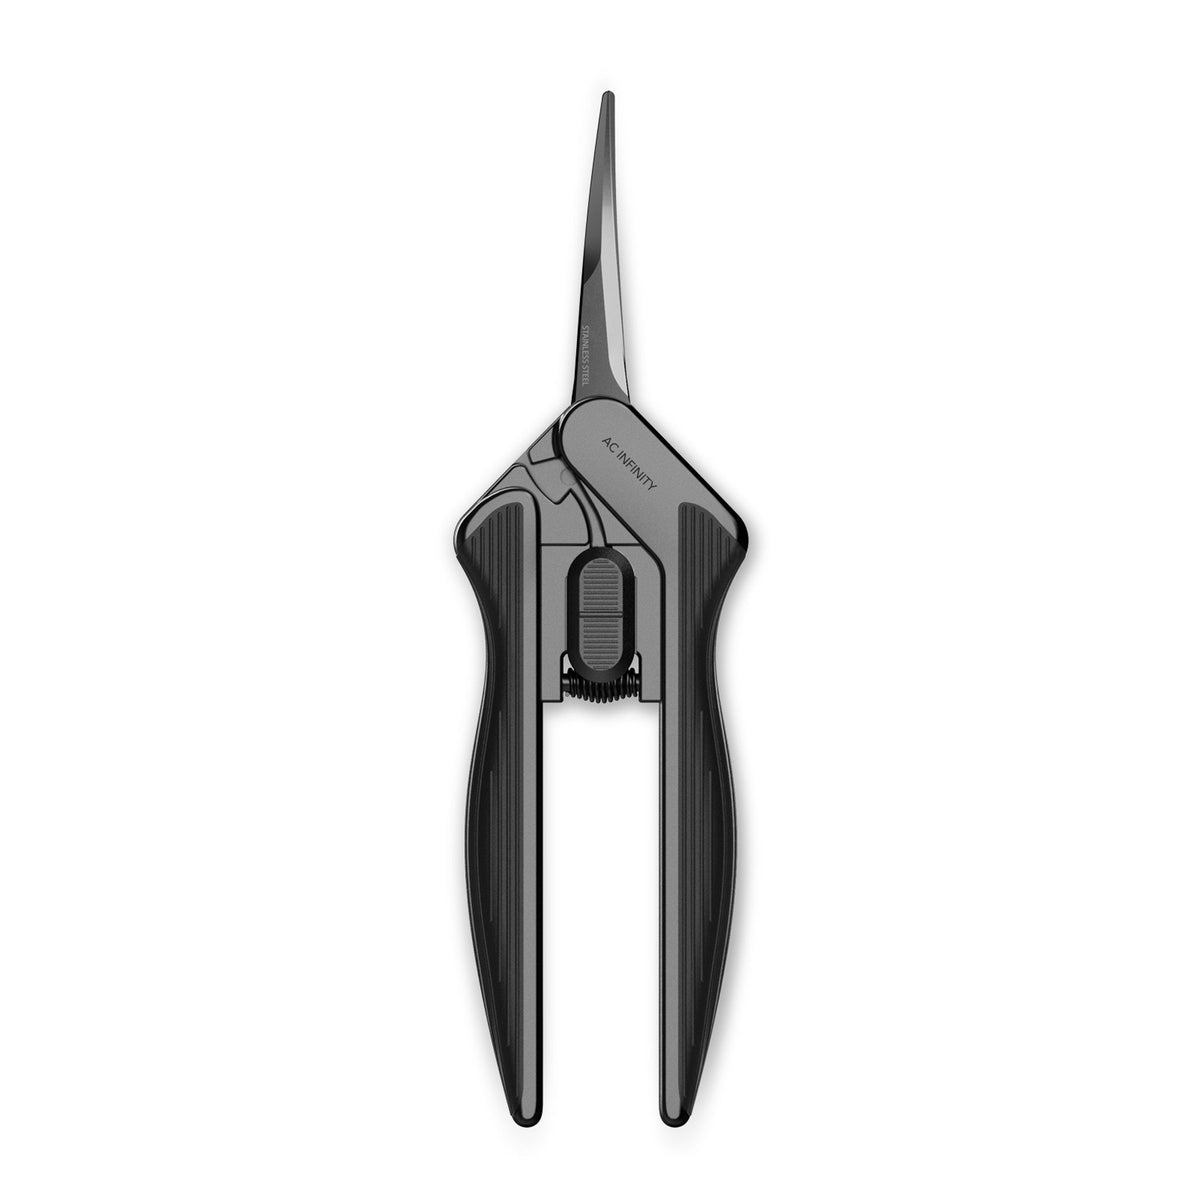 AC Infinity AC Infinity Stainless Steel Curved Pruning Shear Trimming Scissors Main